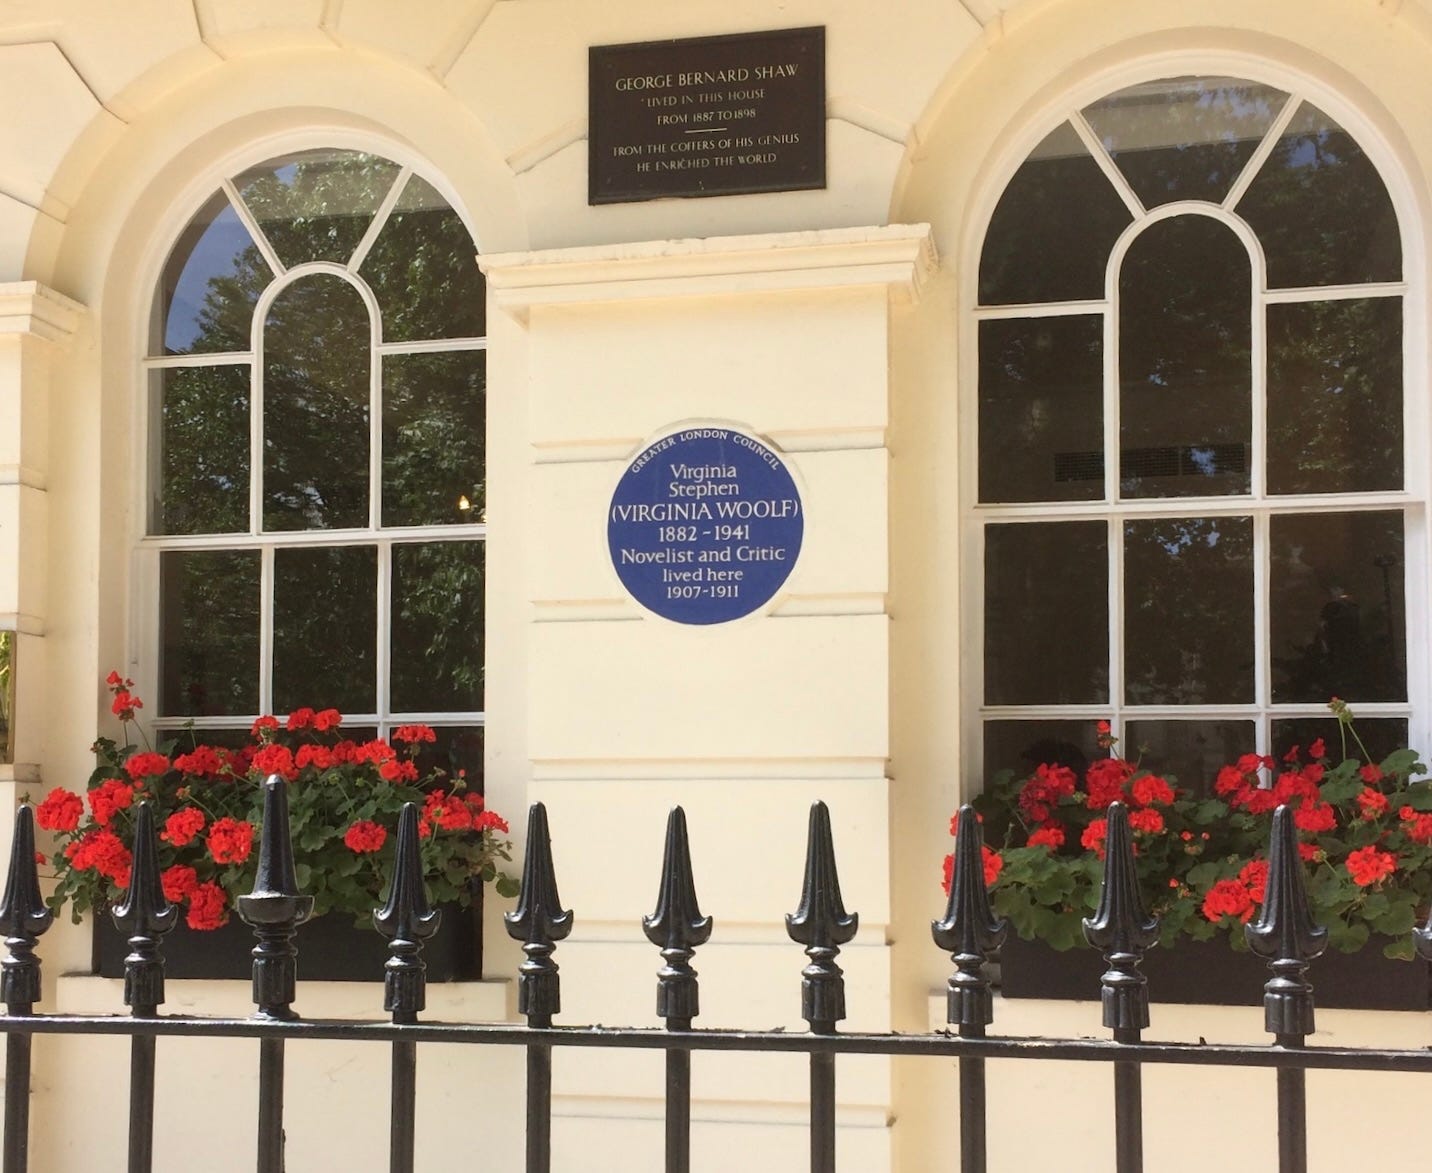 A house facade in a London square with two arched windows and a blue plaque for Virginia Woolf and anther plaque for George Bernard Shaw.